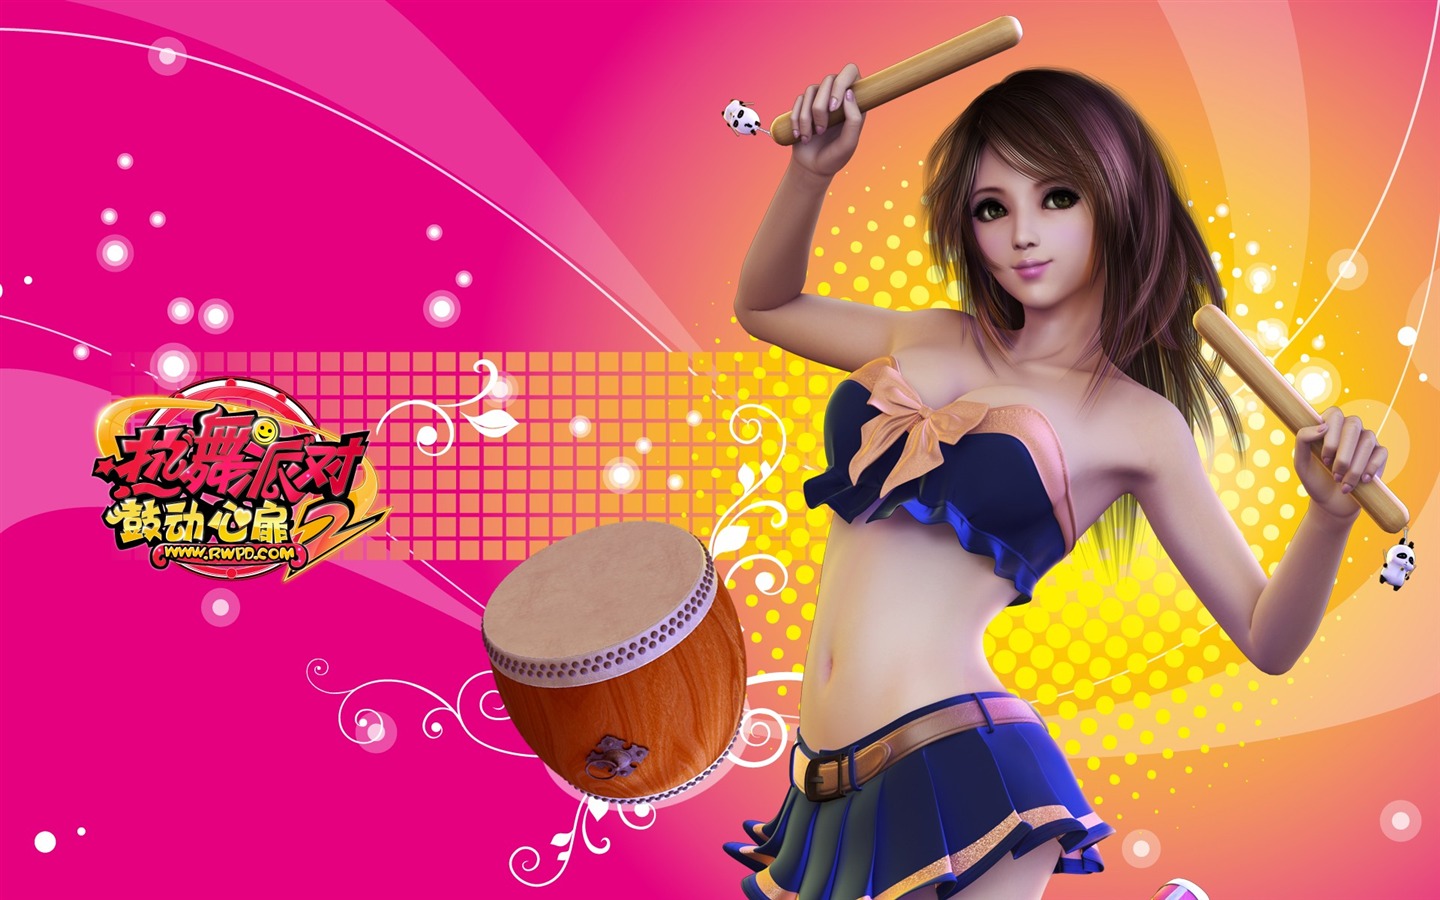 Online game Hot Dance Party II official wallpapers #22 - 1440x900